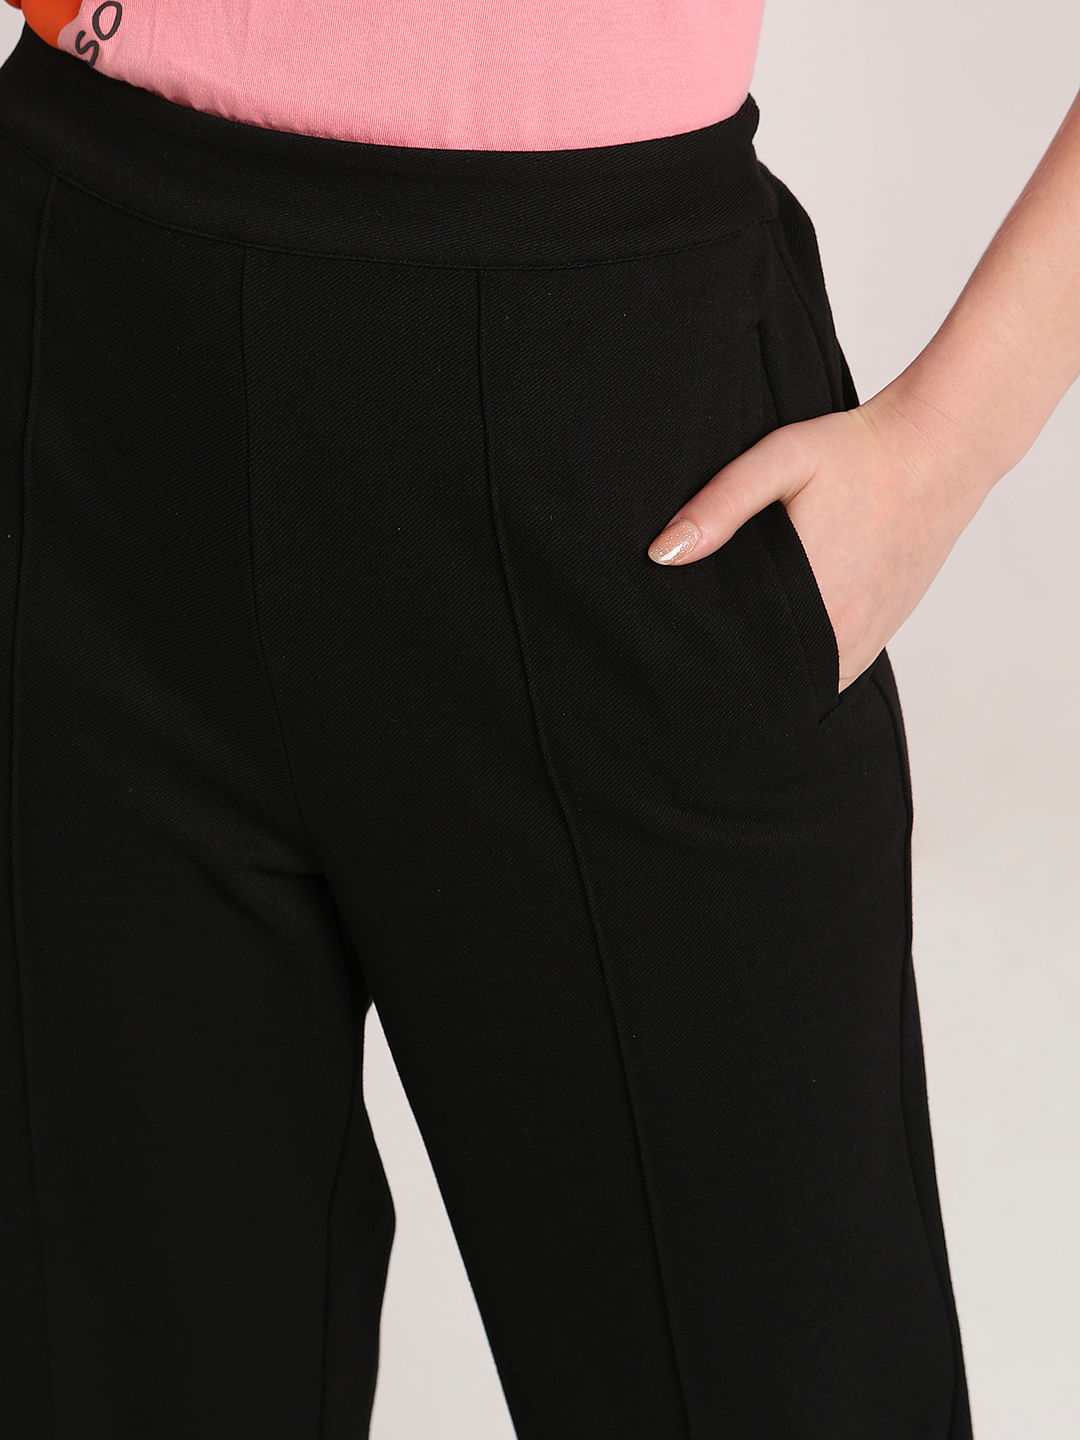 Jeans & Trousers | H&M Black Straight Pants | Freeup